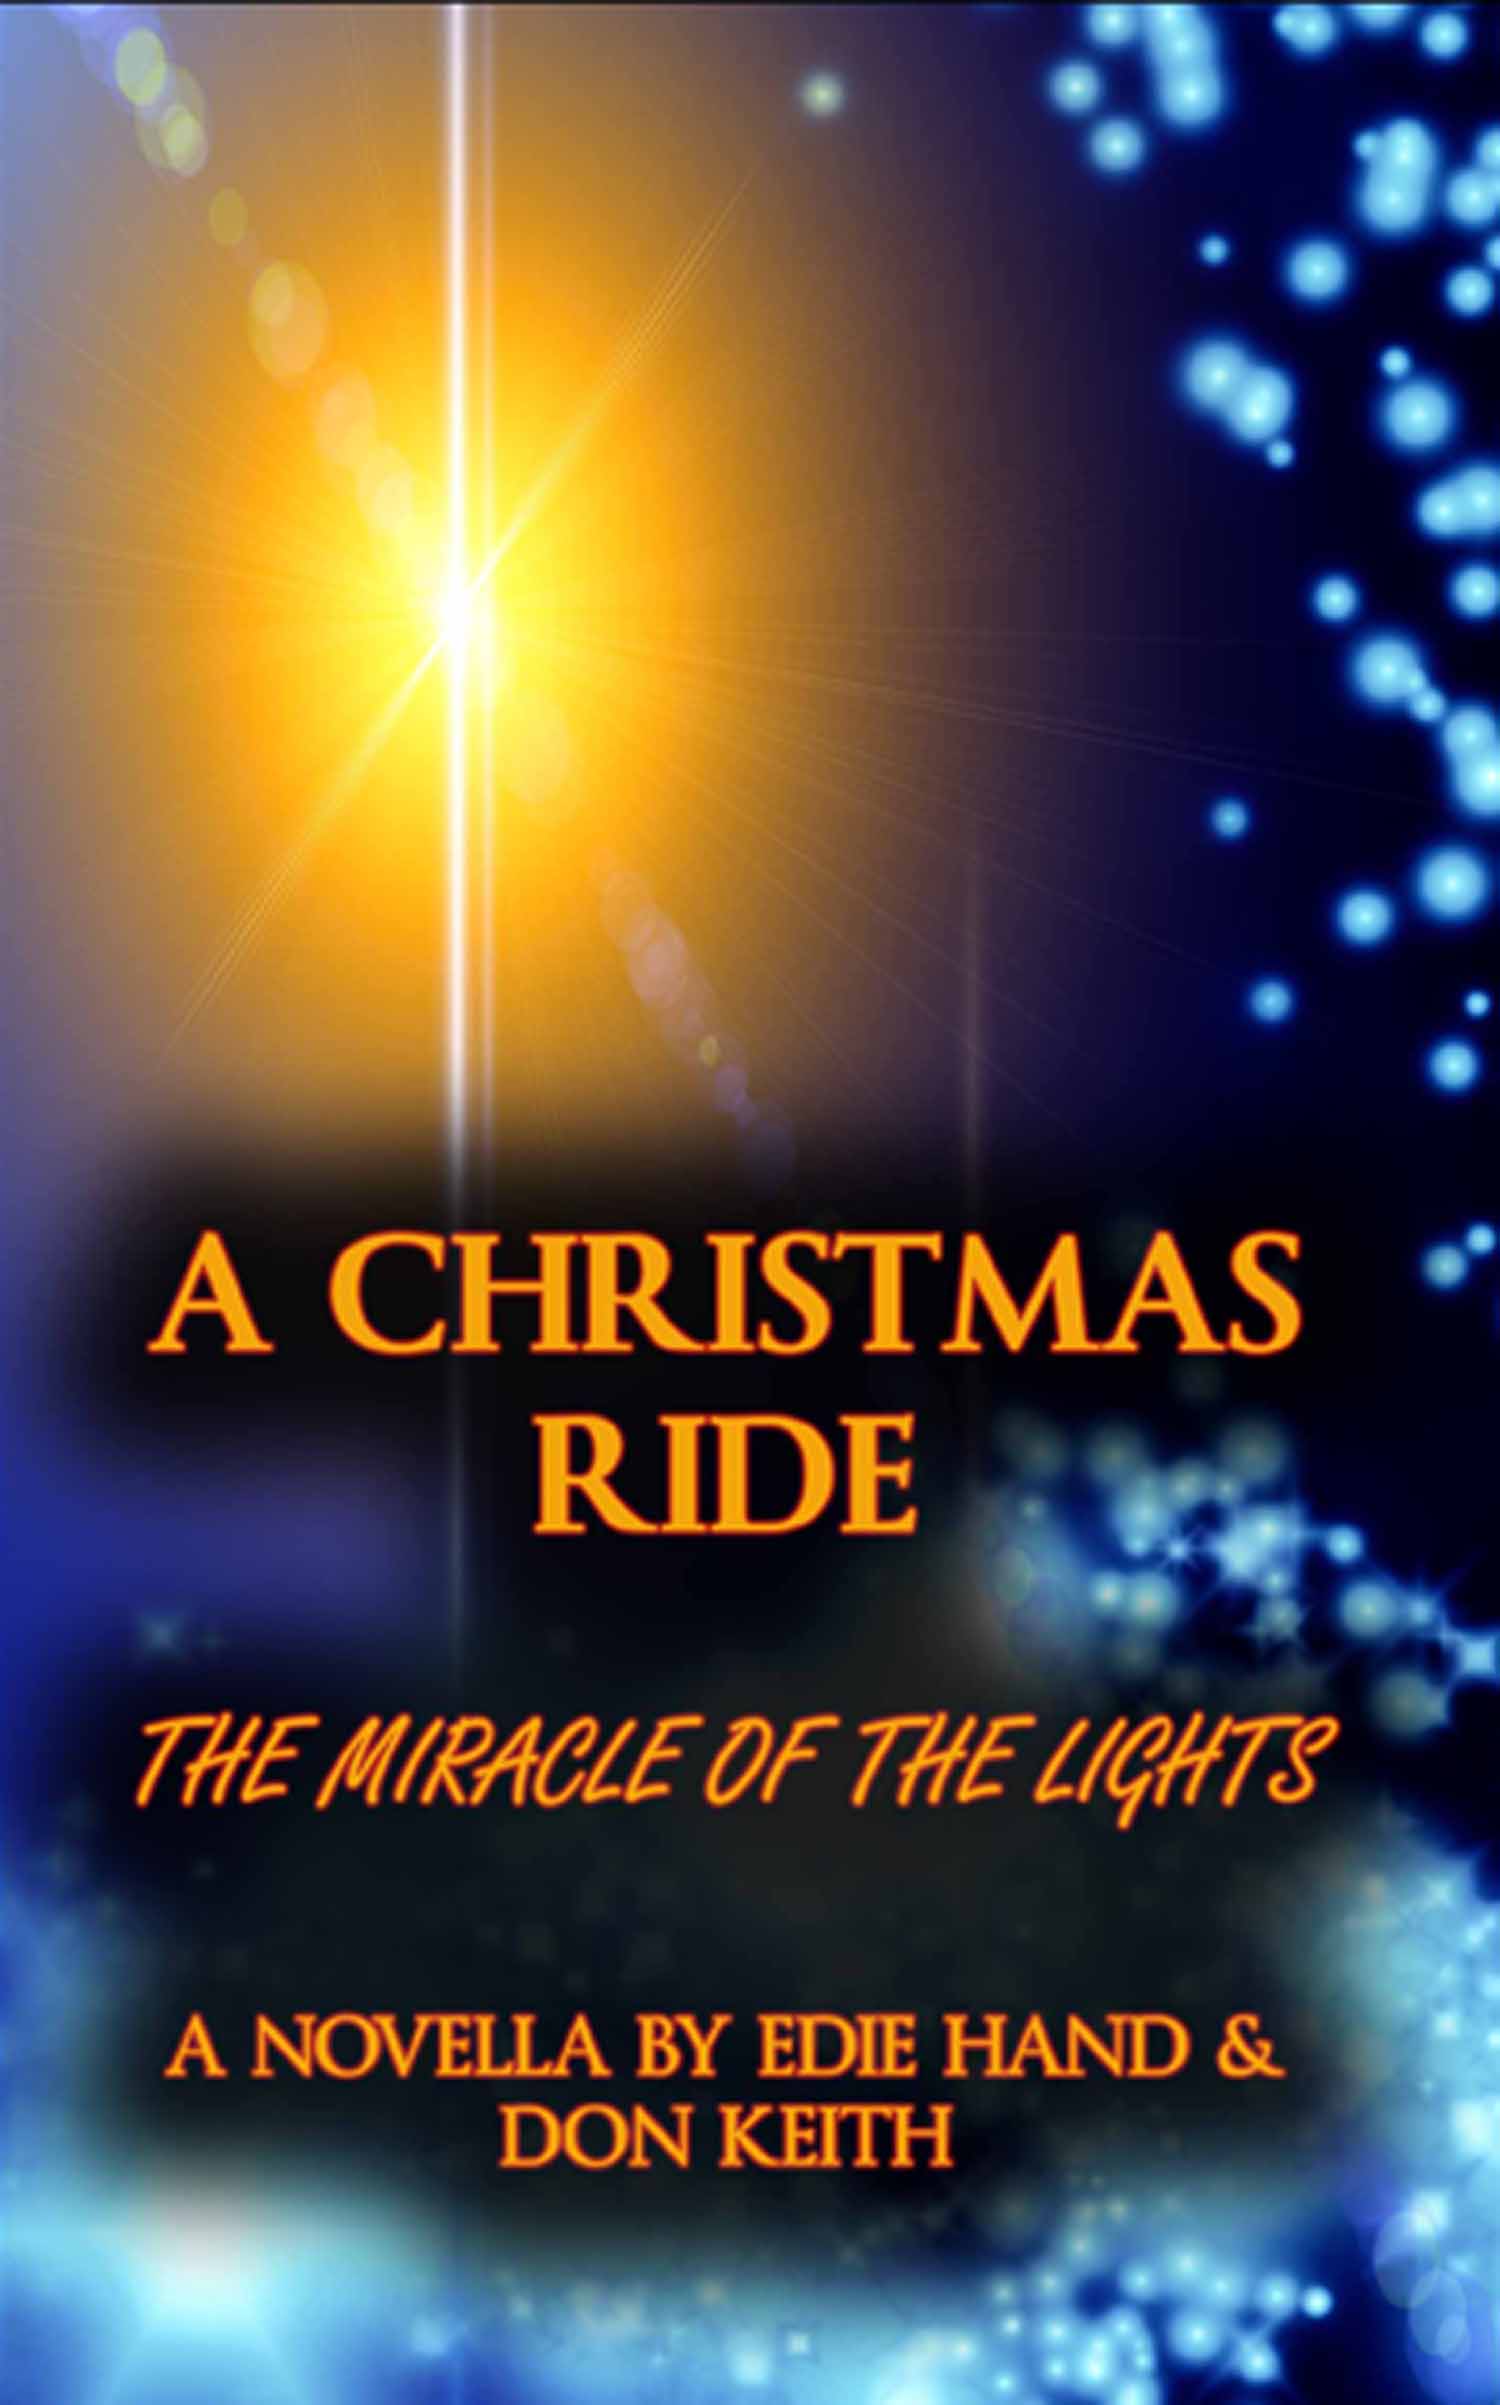 A Chrismas Ride: The Miracle of the Lights